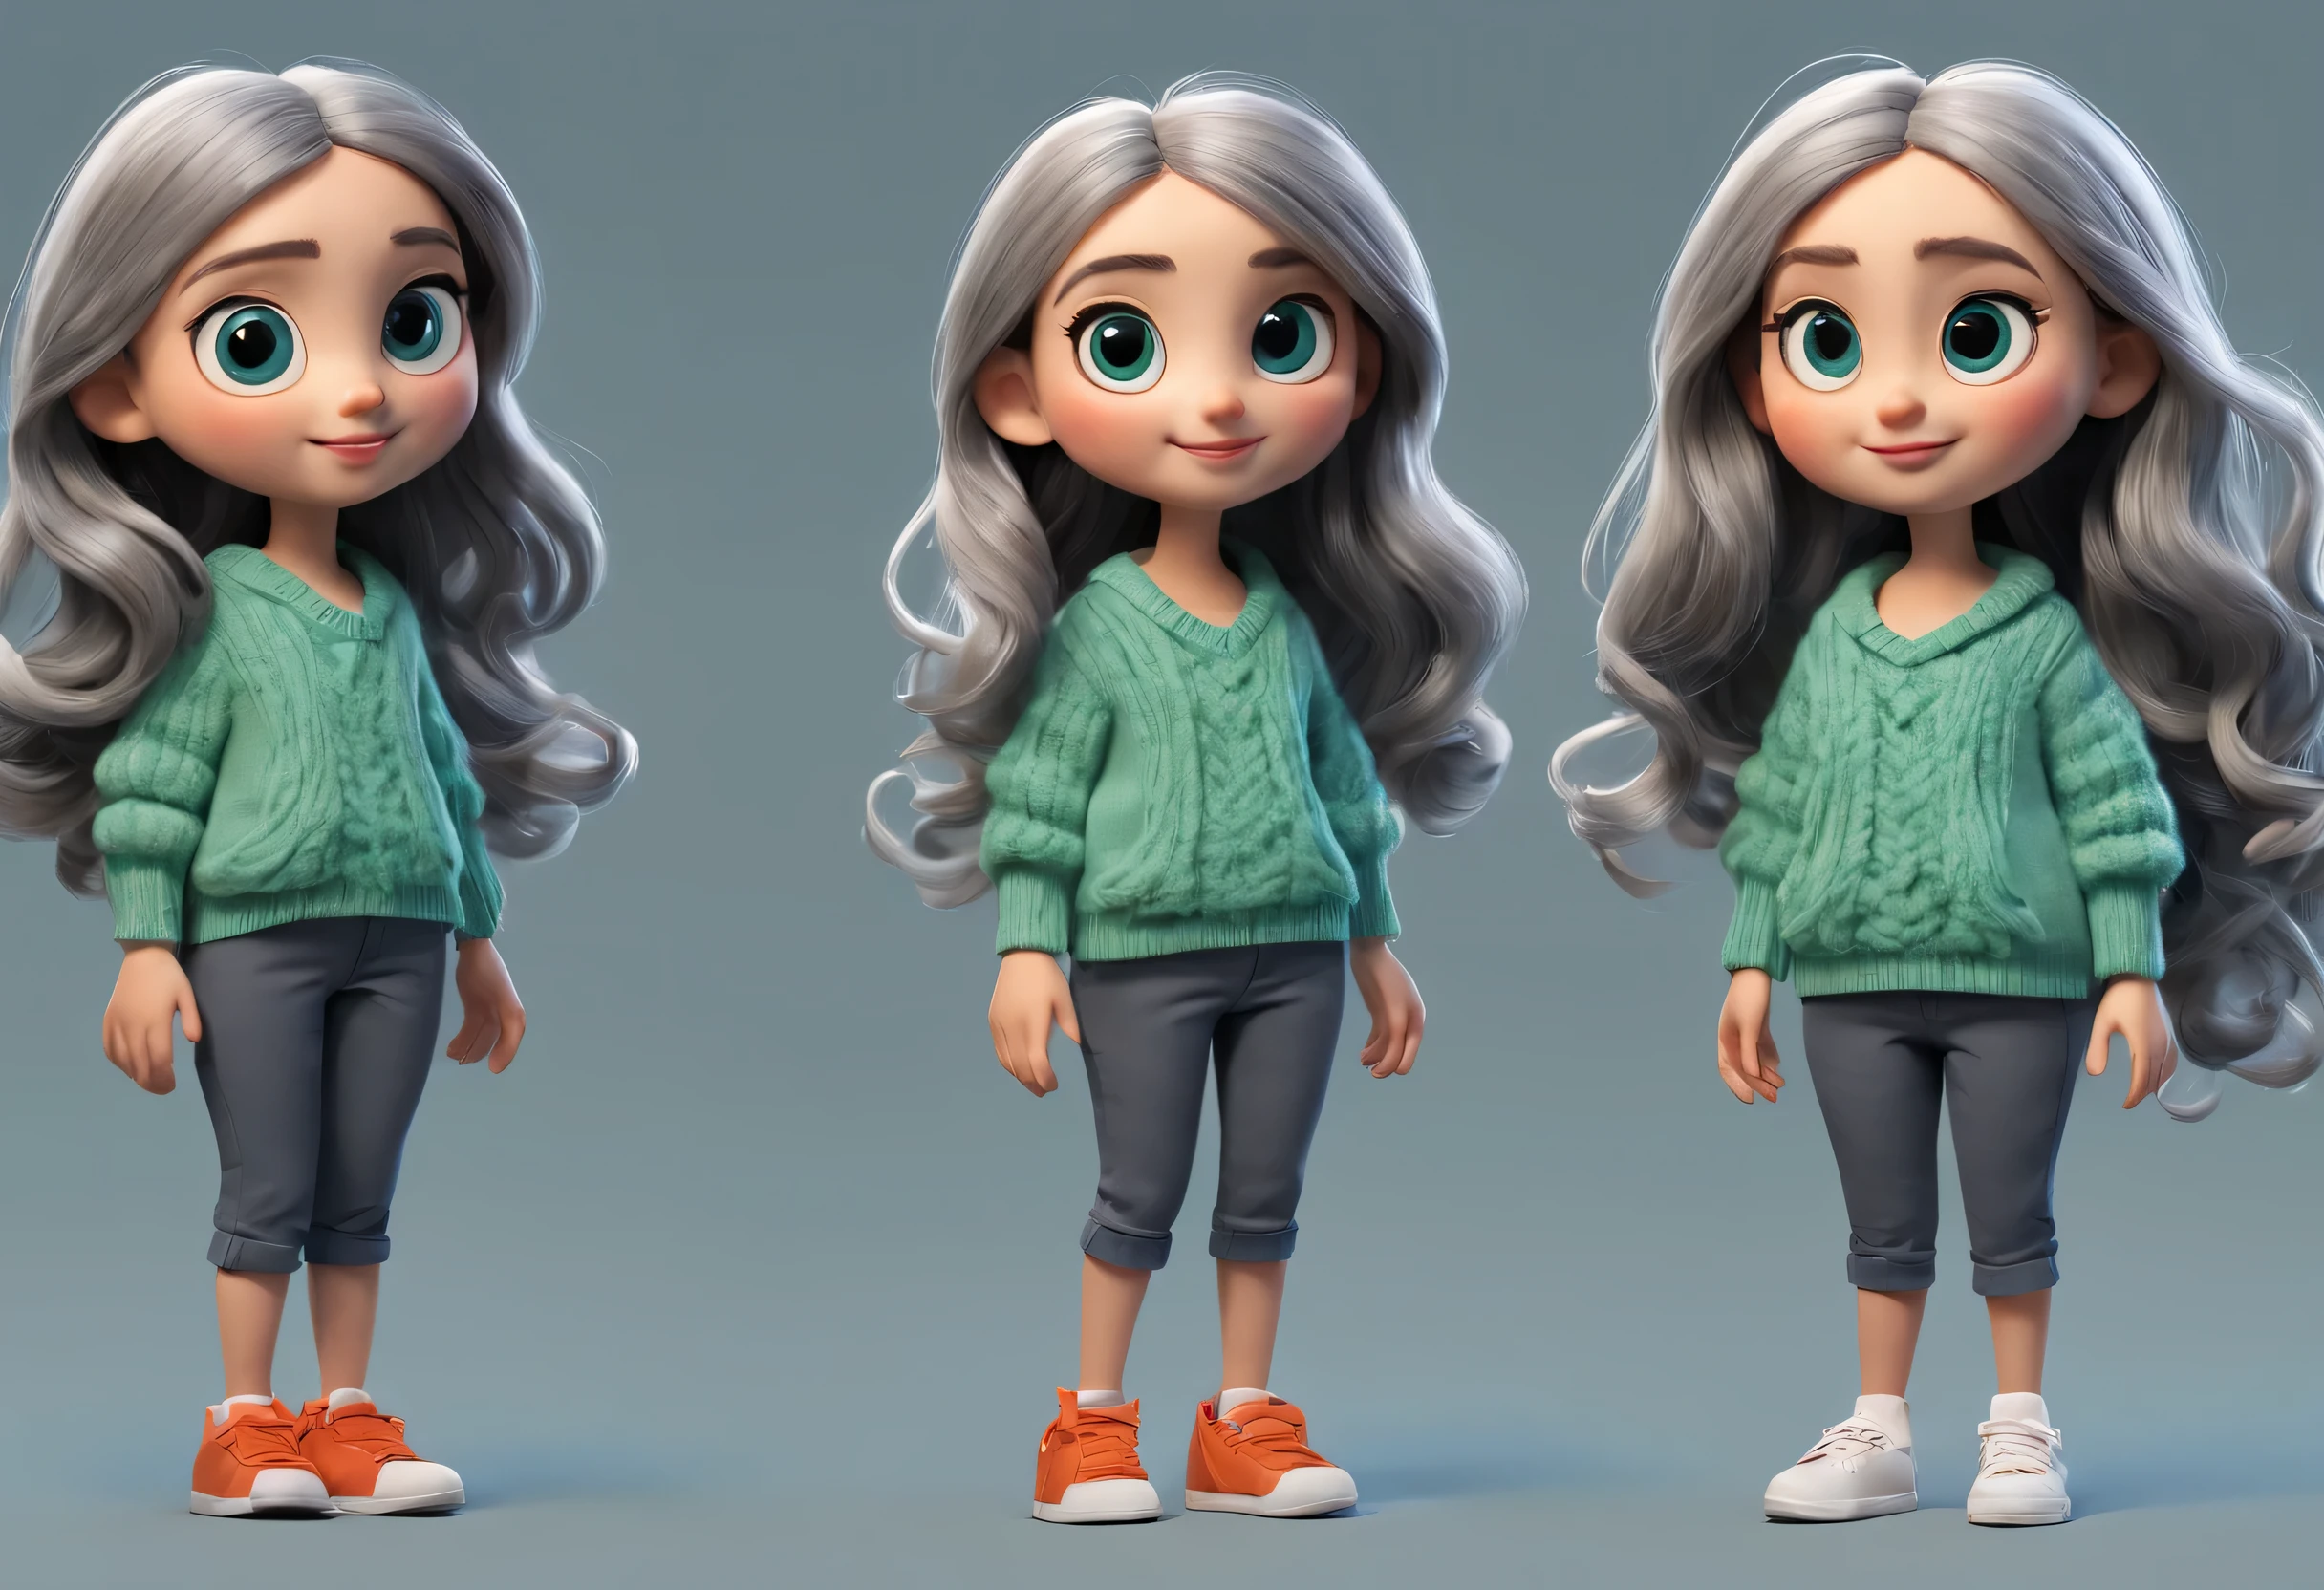 character design sheet, whole body, front, (same cartoon girl) the same cartoon girl, Walking humming, Wear different color designs, Beautiful face and big eyes, White extra-long curly hair, blue sweater, green sweater, gray sweater, gray baggy pants, black baggy pants, role conception, Unreal Engine, Pixar style, cartoon, 3d rendering, yarn art, puppet, detailed role conception, best quality, Ultra-detailed, 8k,